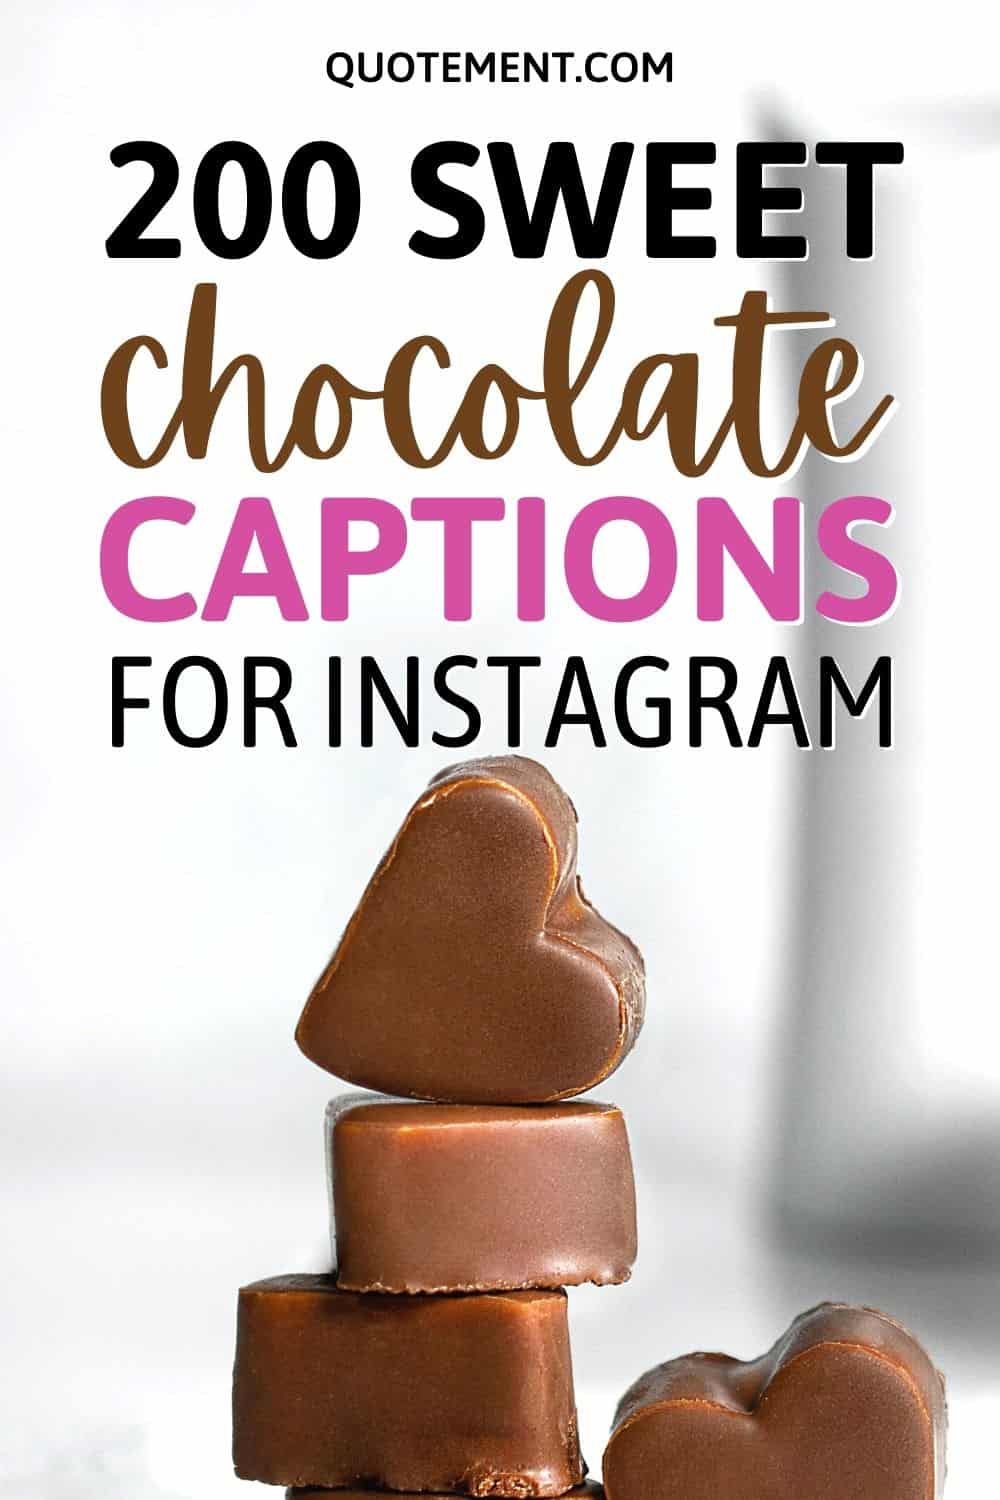 125 Best Chocolate Quotes and Sayings  Chocolate Cherry Kisses